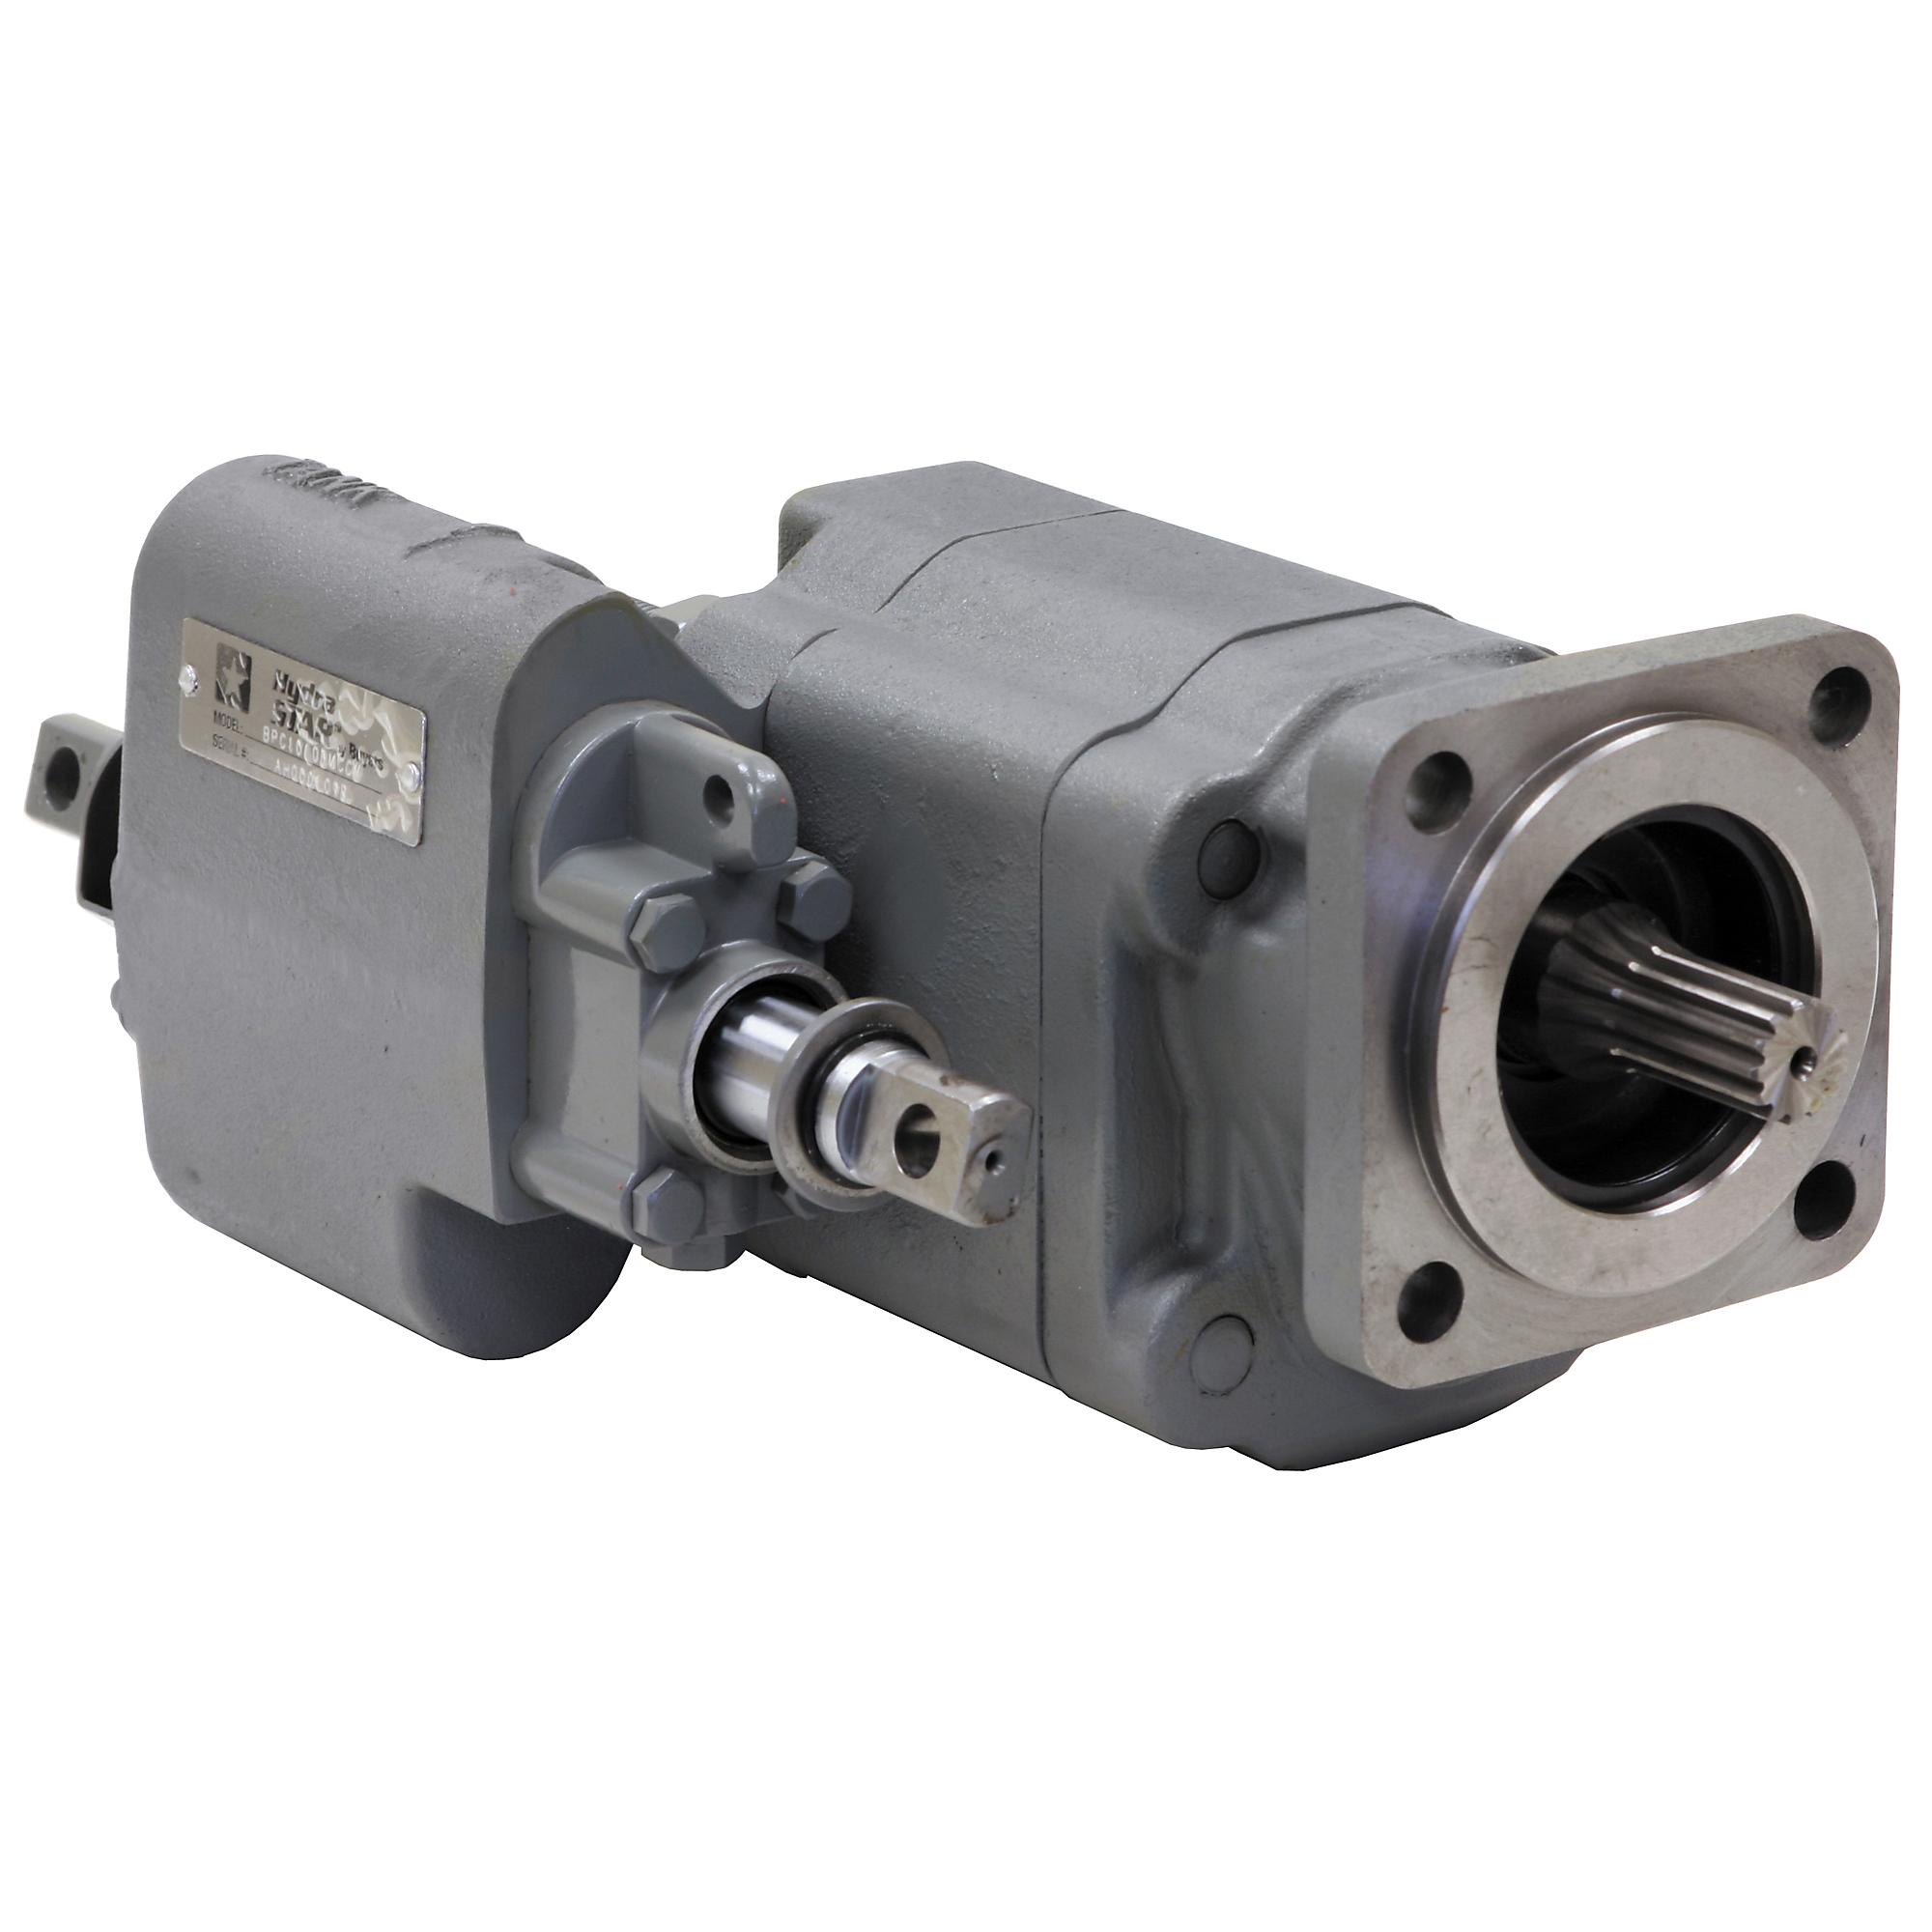 Buyers Products Air Shift Hydraulic Cylinder Pump, Max. PSI 2500, Max. RPM 2000, Model C1010DMCCWAS